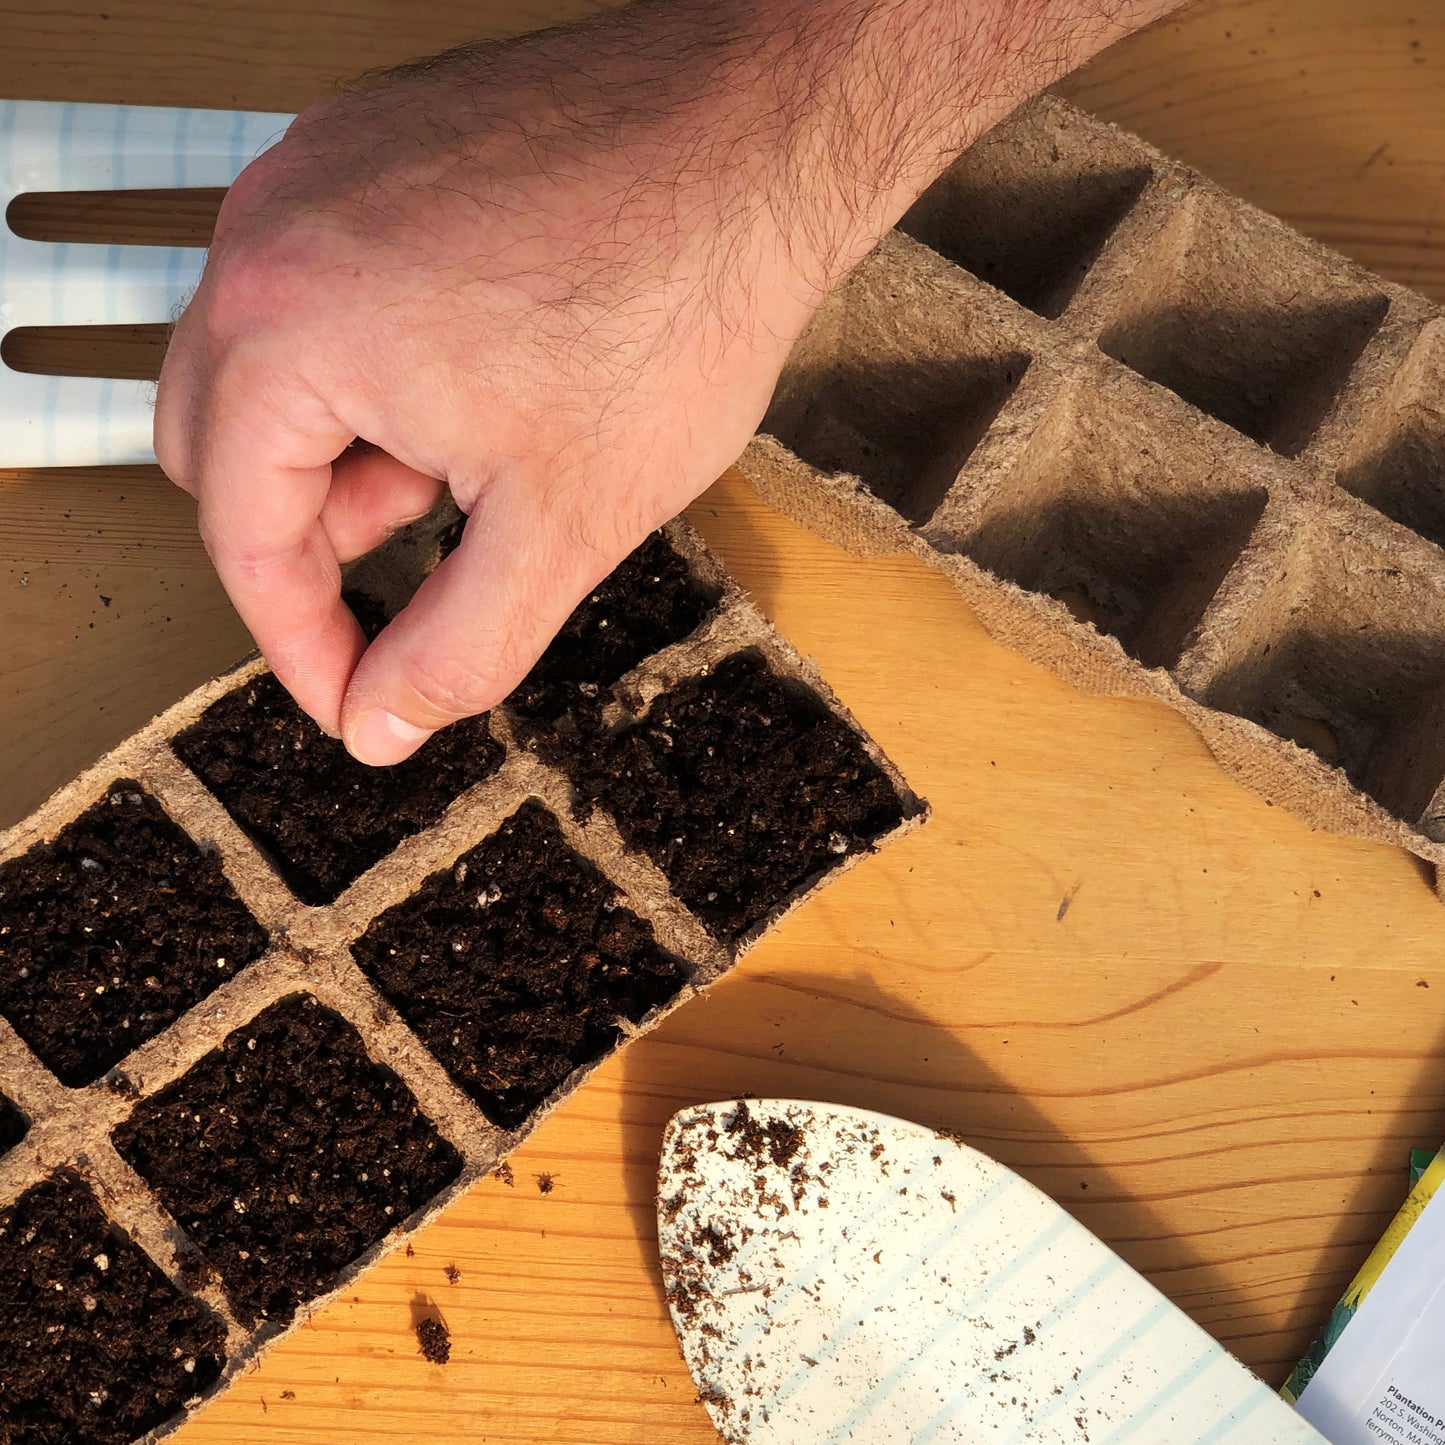 Sowing Organic Early Long Purple Eggplant Seeds into Jiffy seed starting peat strip trays.